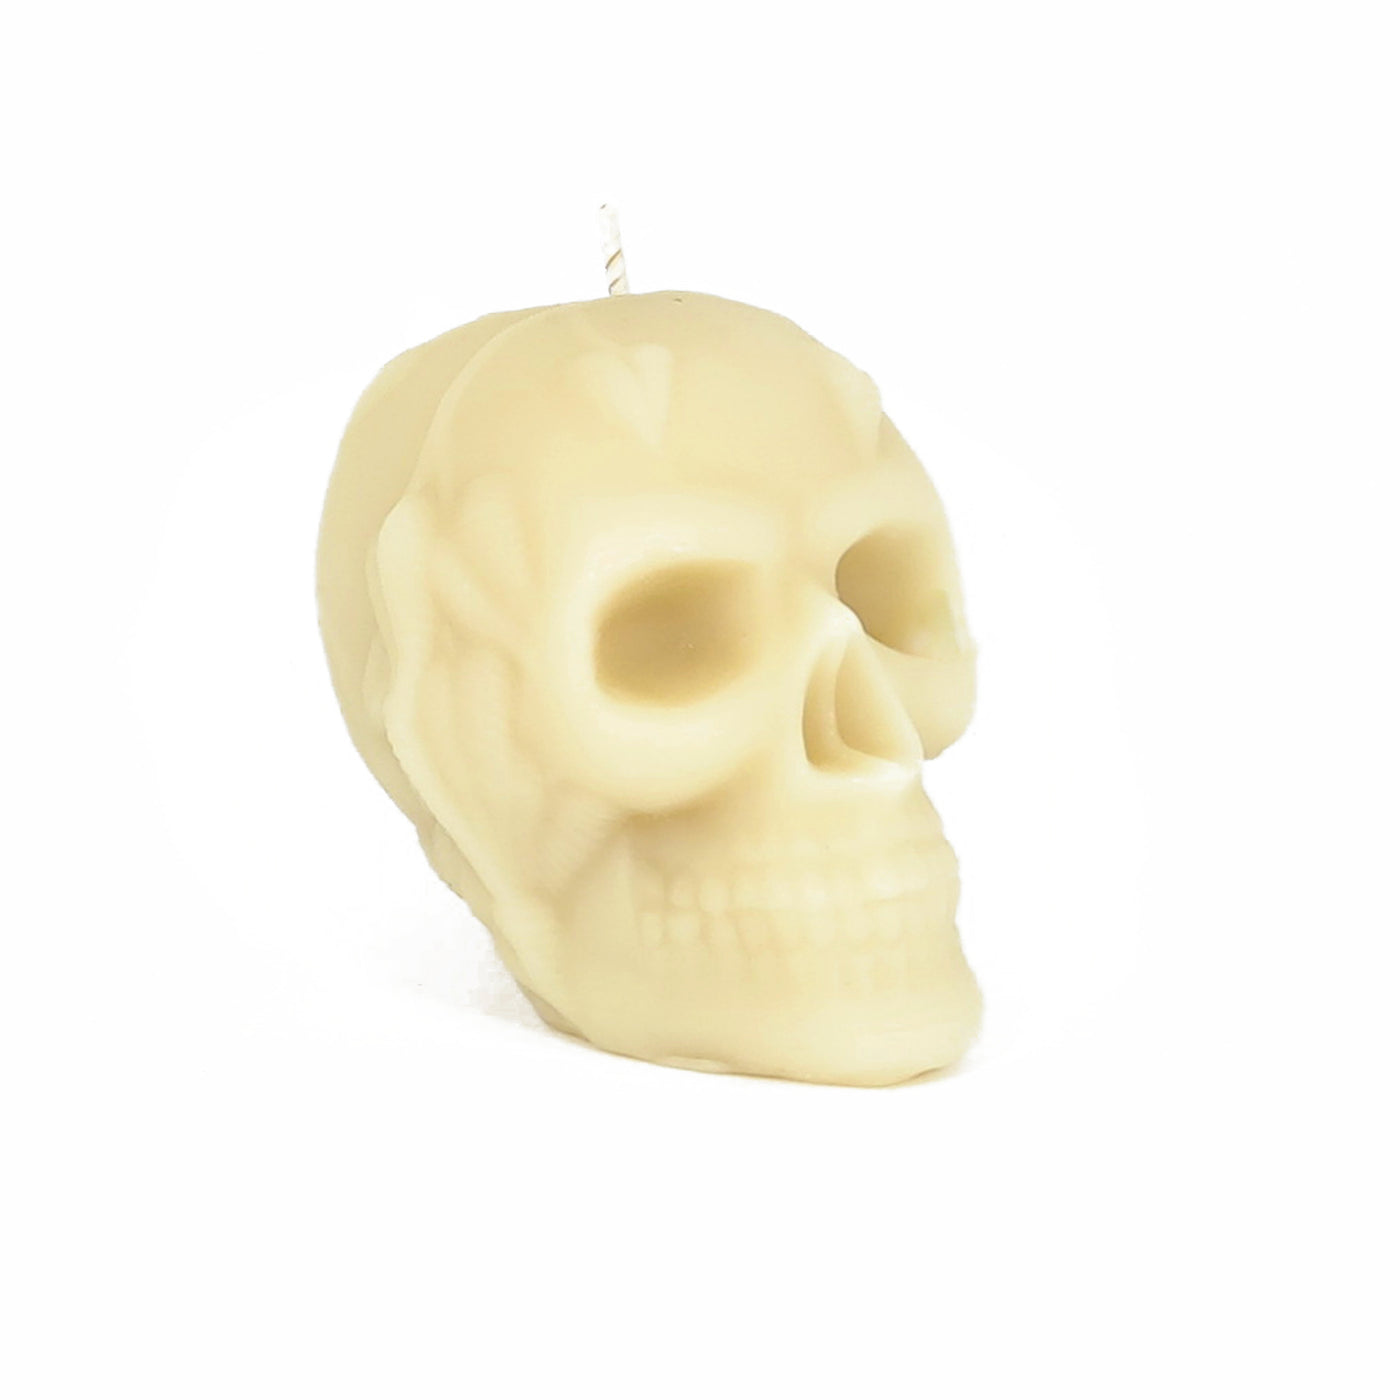 A World of True Imagination... launching our Skull Candle